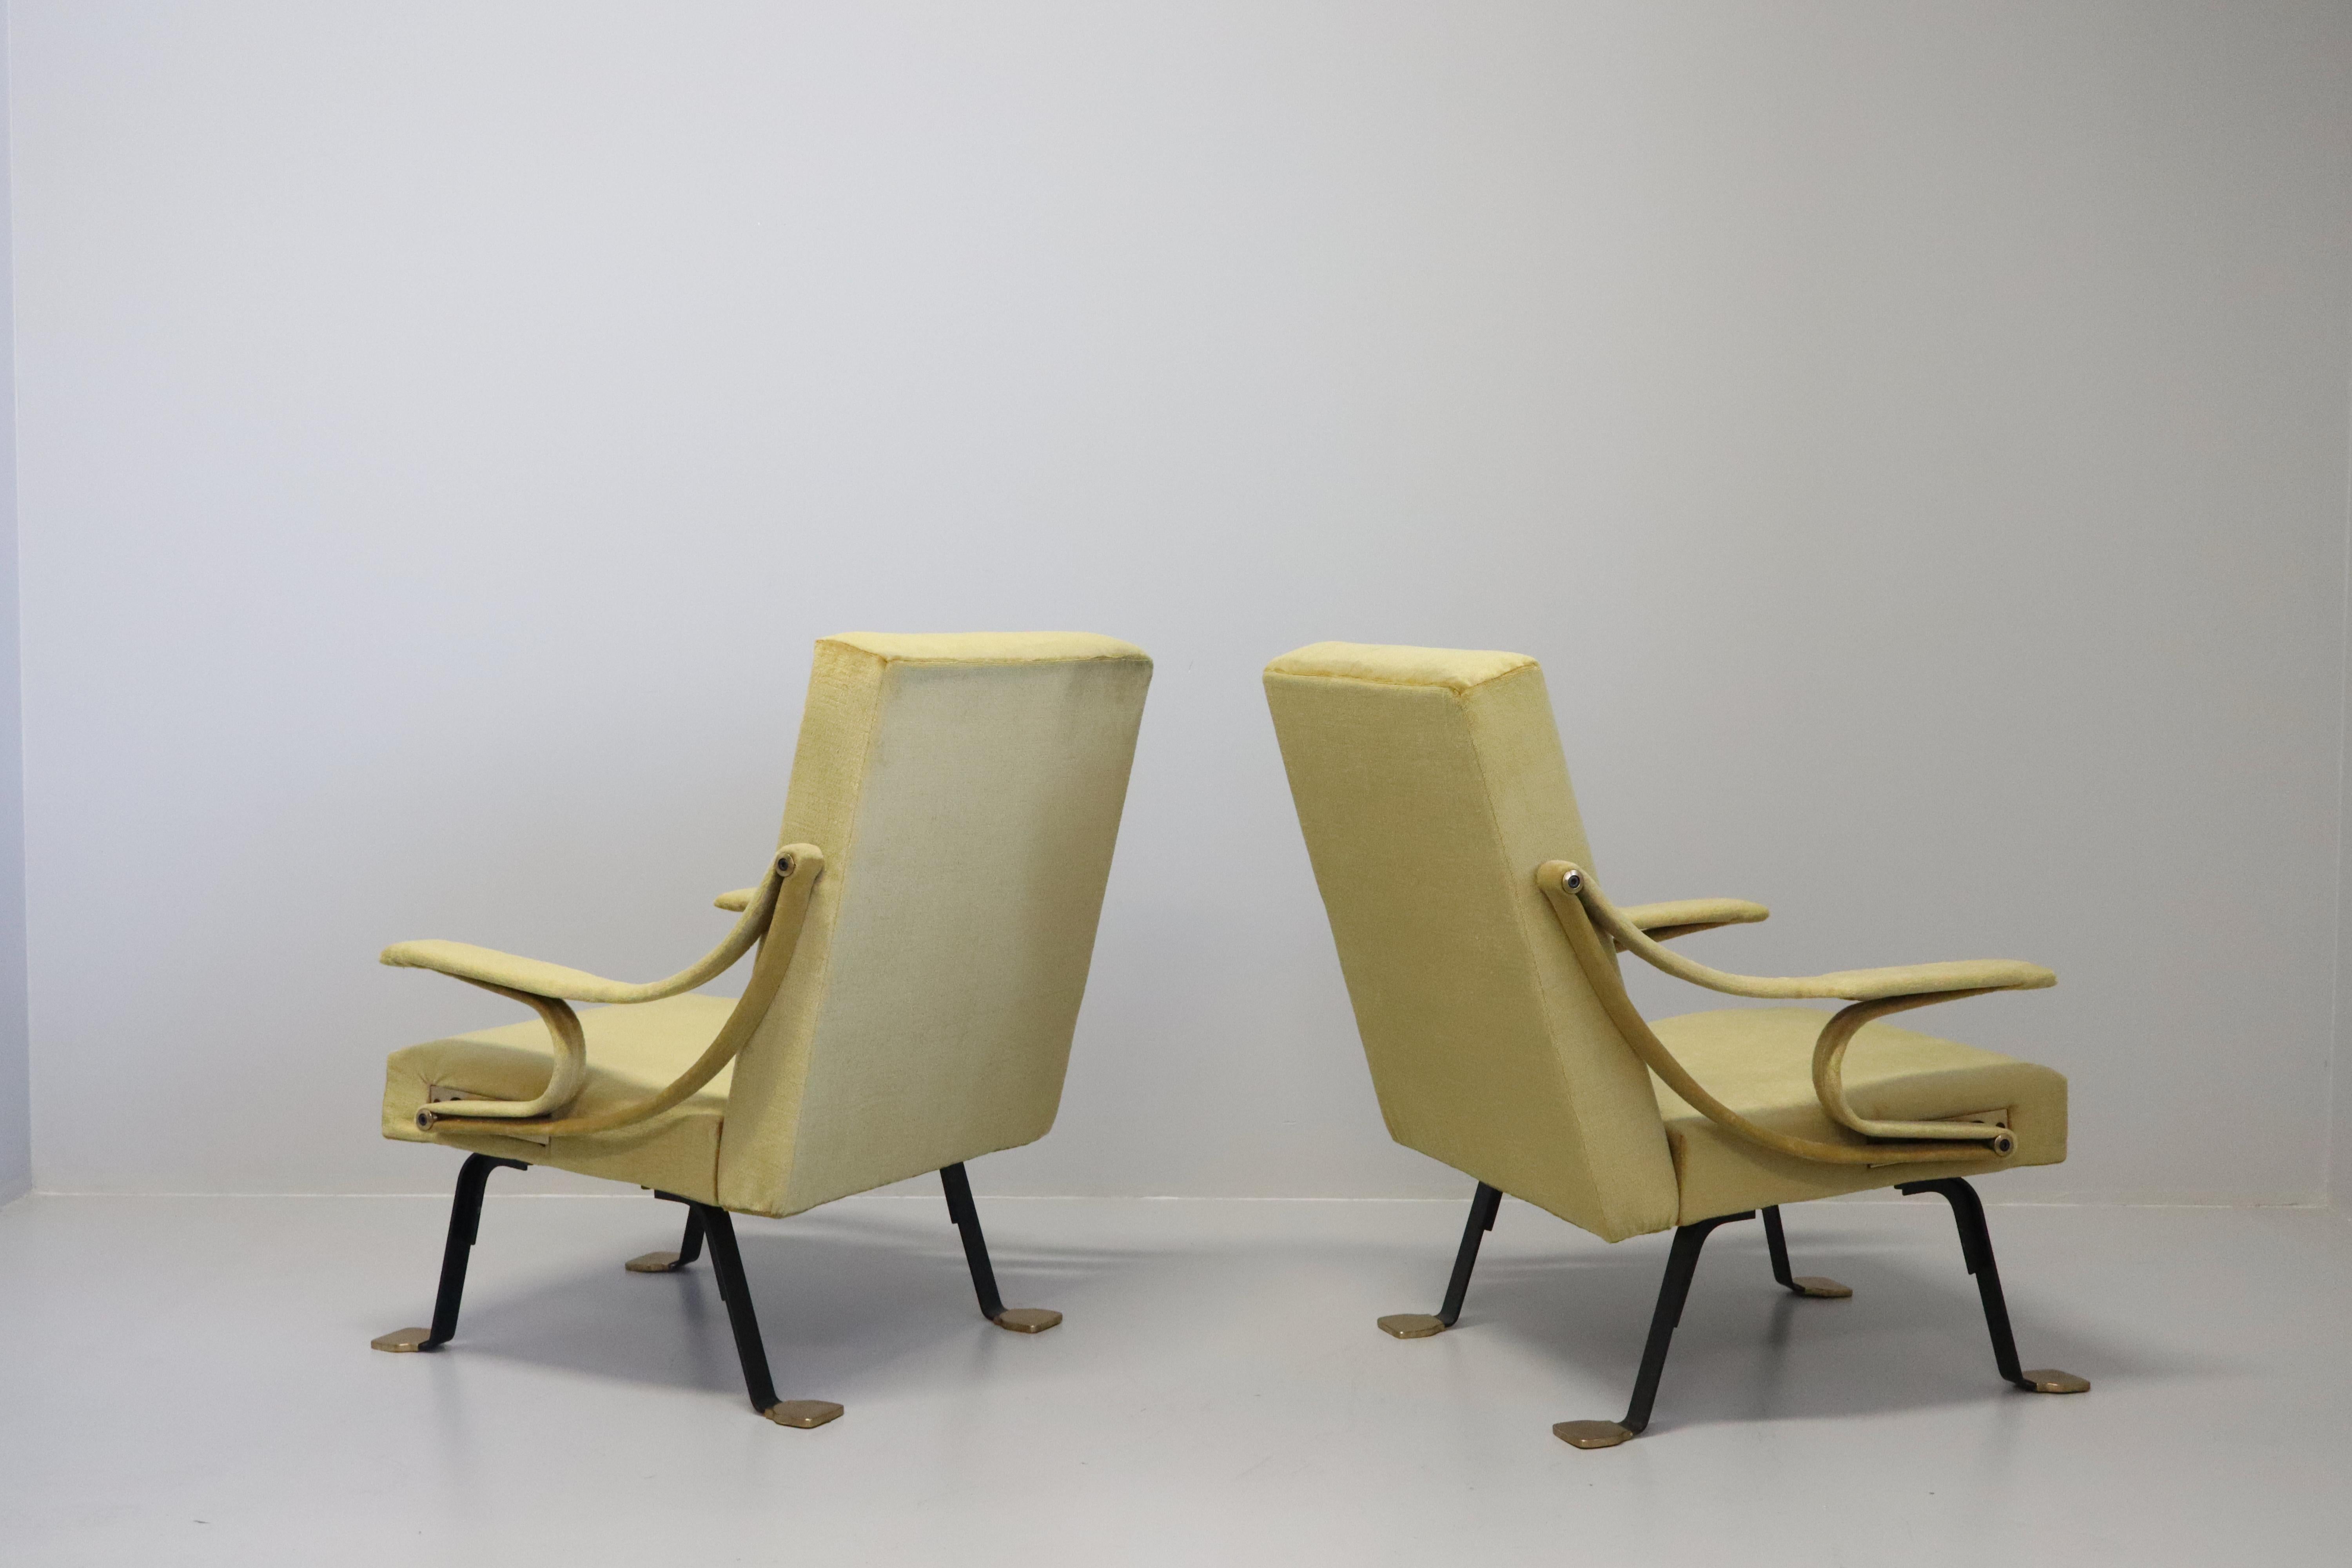 An extremely rare first edition pair of original 1950's Digamma reclining chairs designed by Ignazio Gardella designed in 1957 and manufactured by Gavina, Bologna, Italy.   The chairs retain their original strap and the frame and feet are in